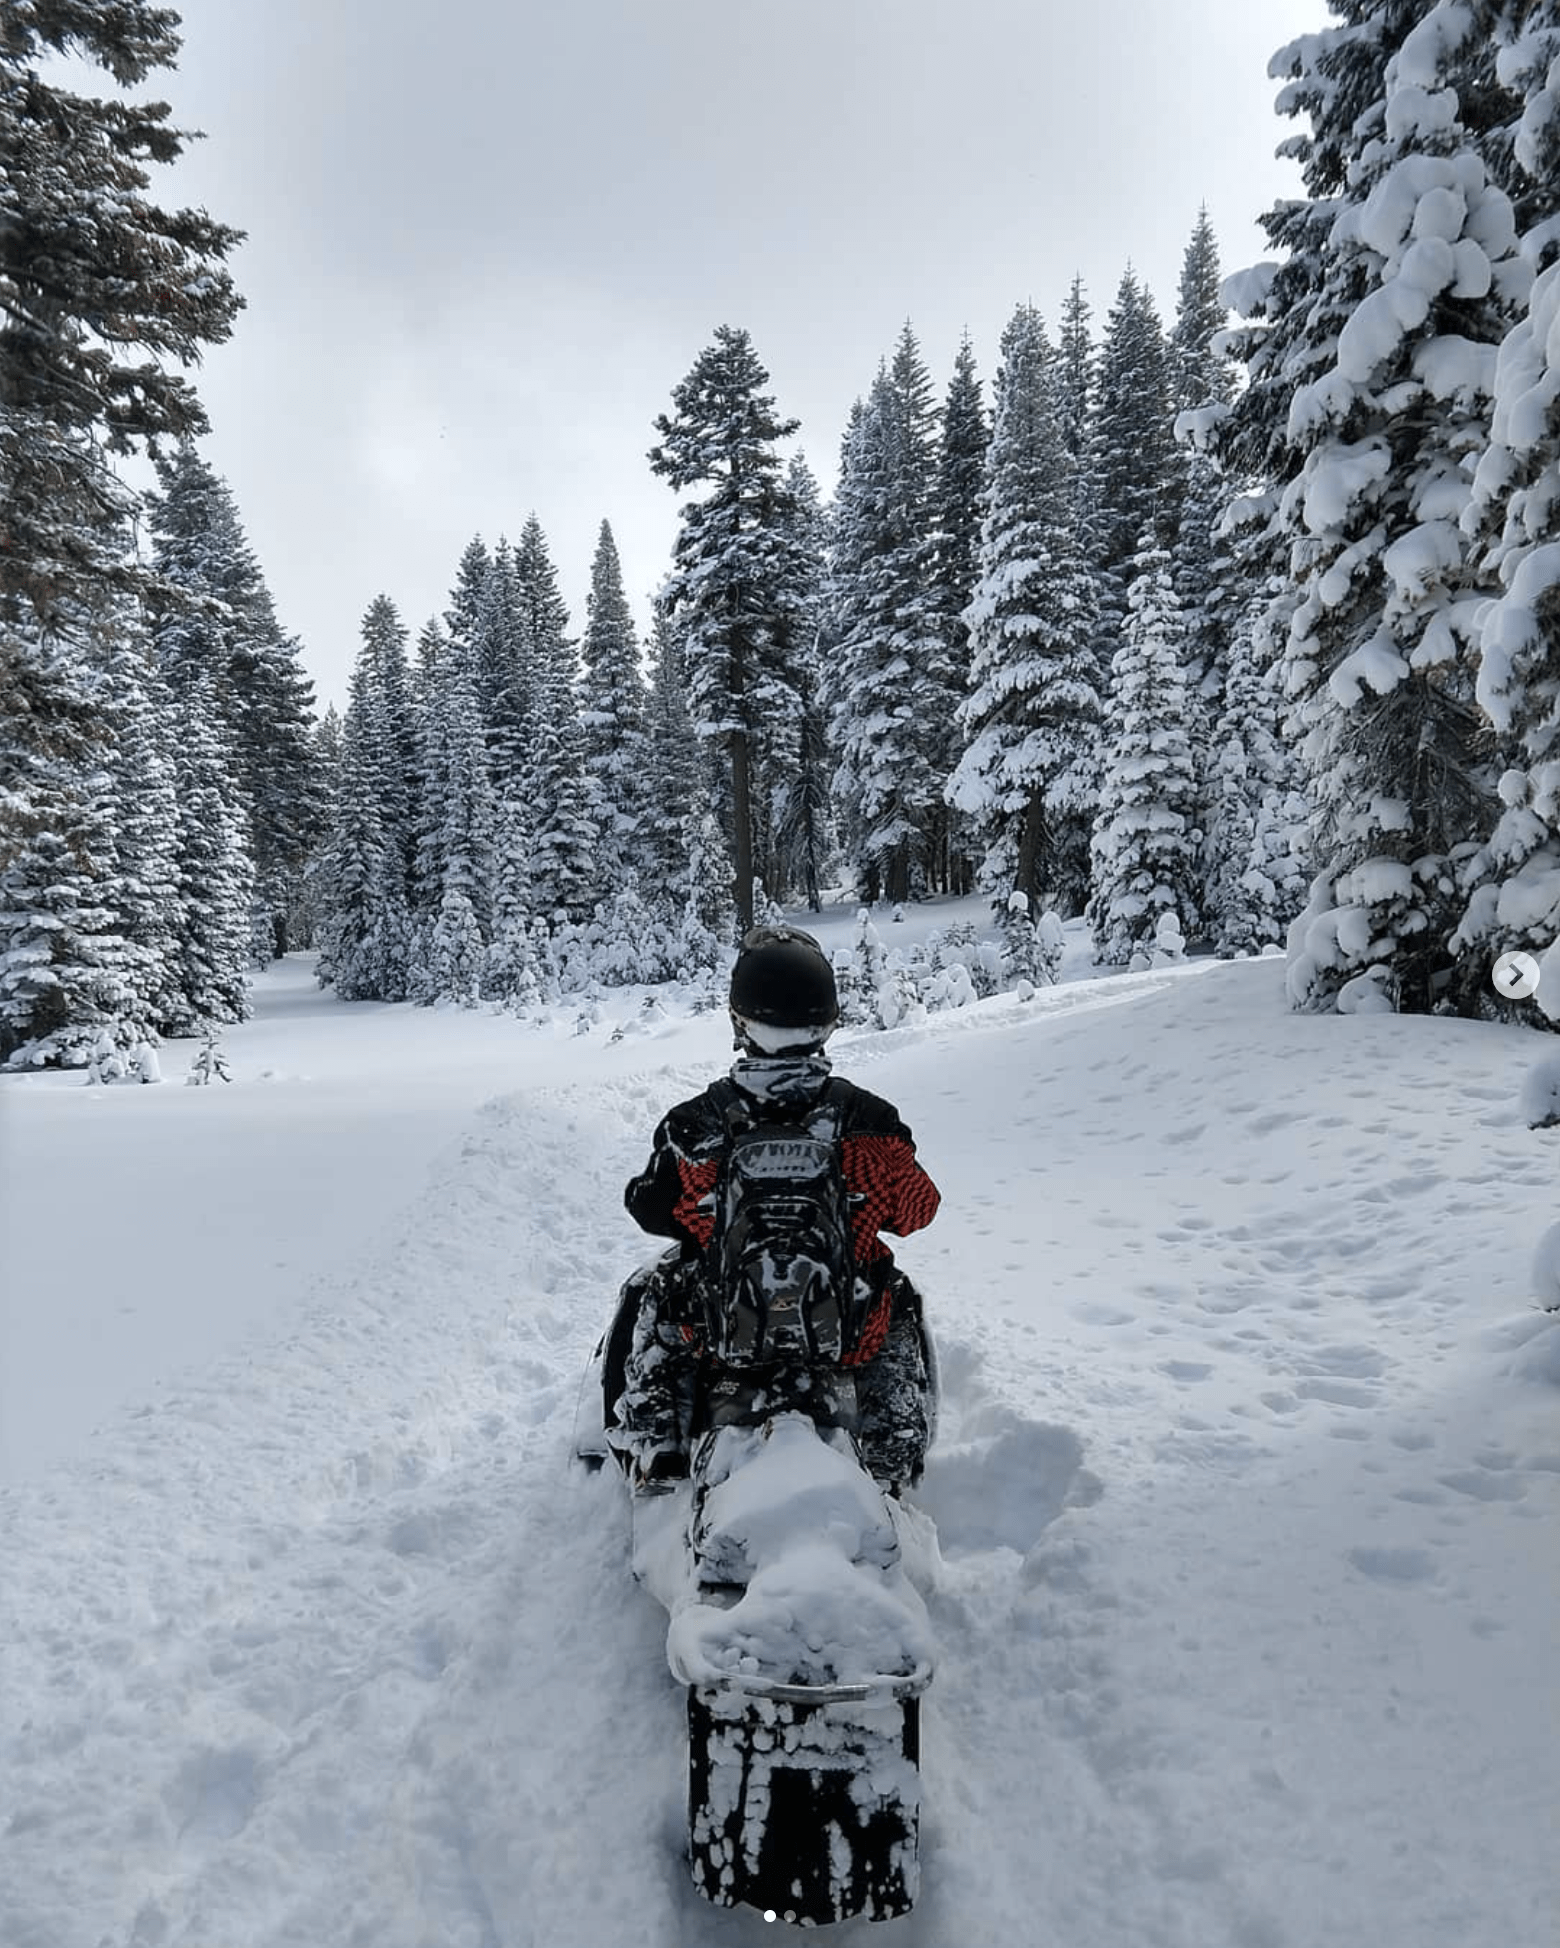 The back of a man on a snowmobile in a snowy, winter landscape with lots of powder on the ground and on his jacket.